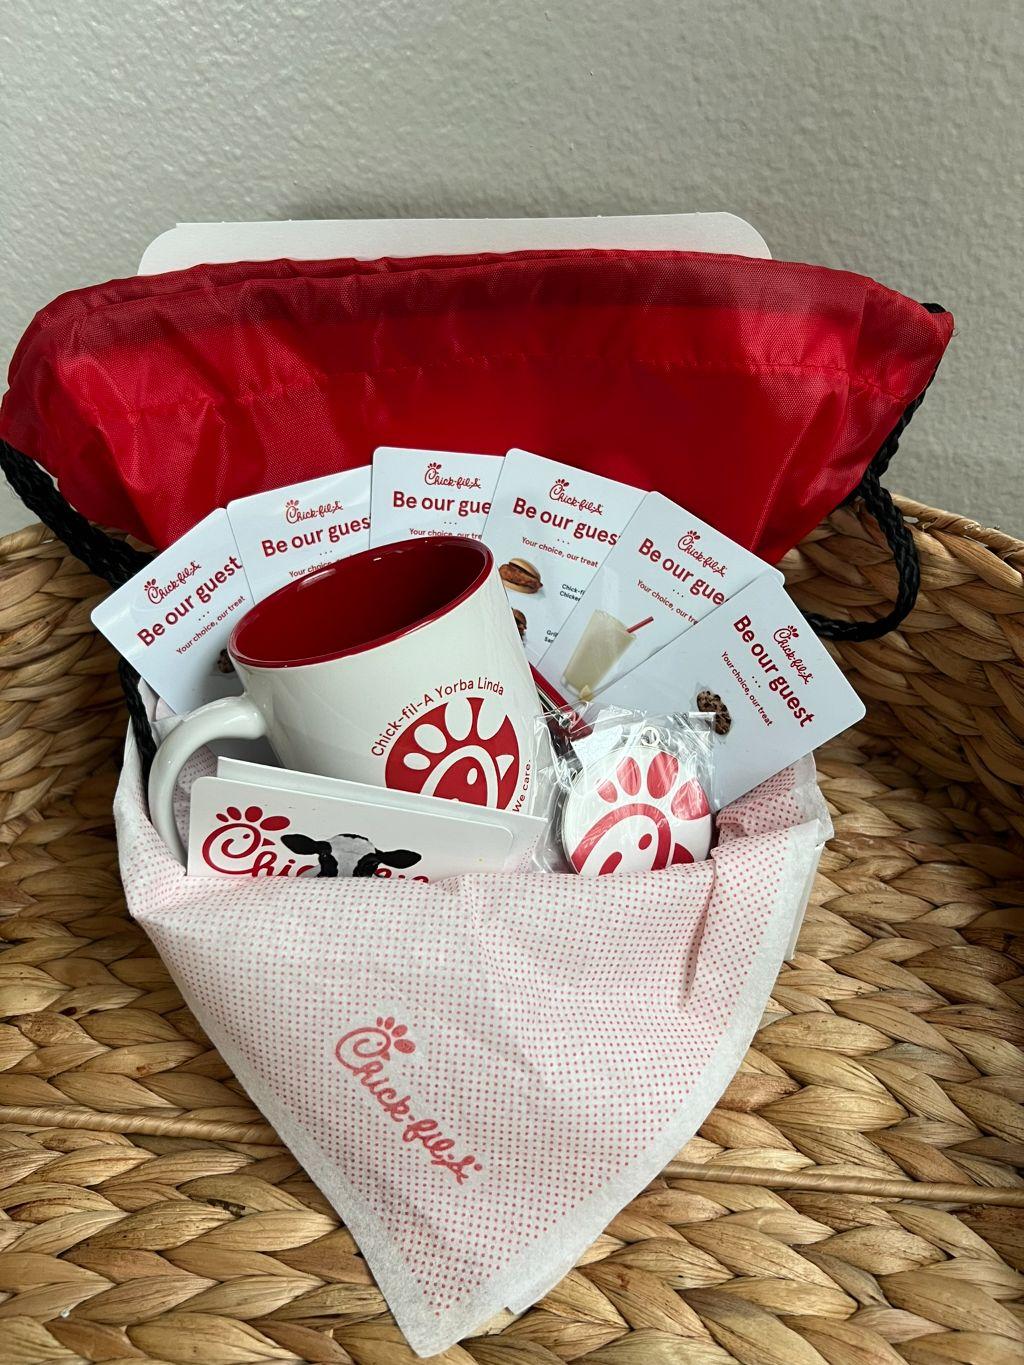 Be Our Guest - Chick-Fil-A Basket